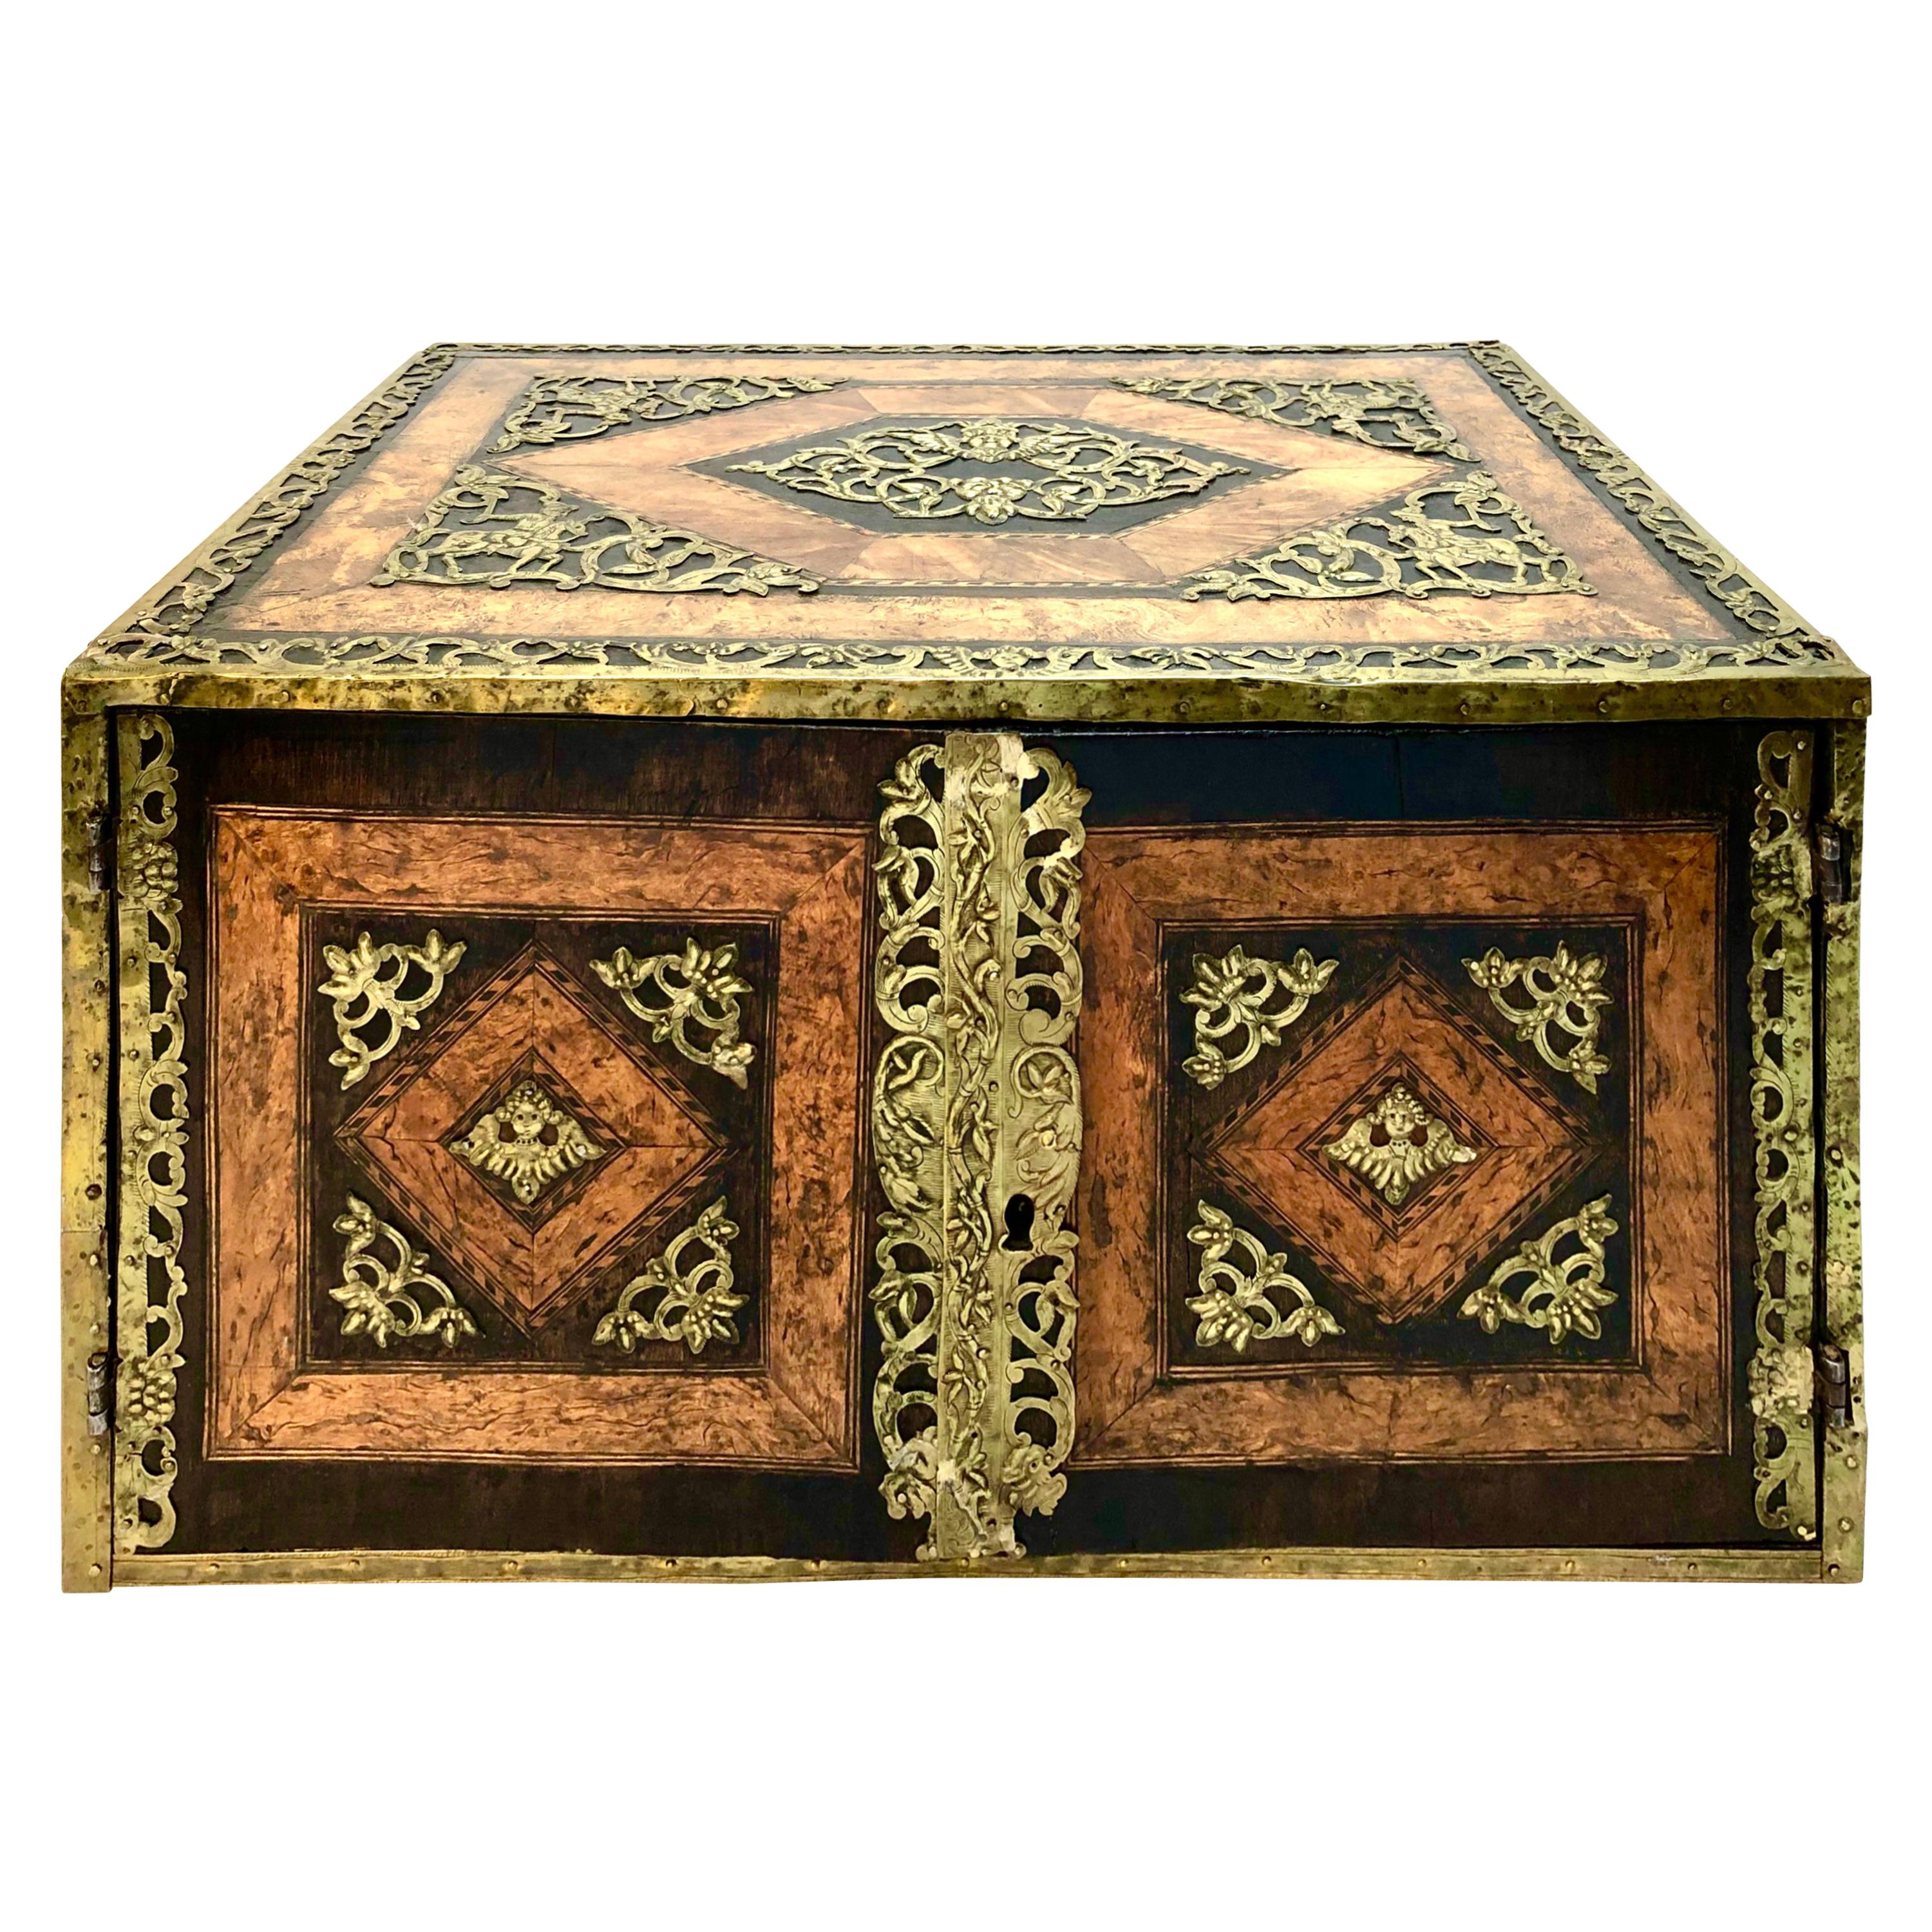 North European 17th Century Brass Mounted Elm and Walnut Table Cabinet